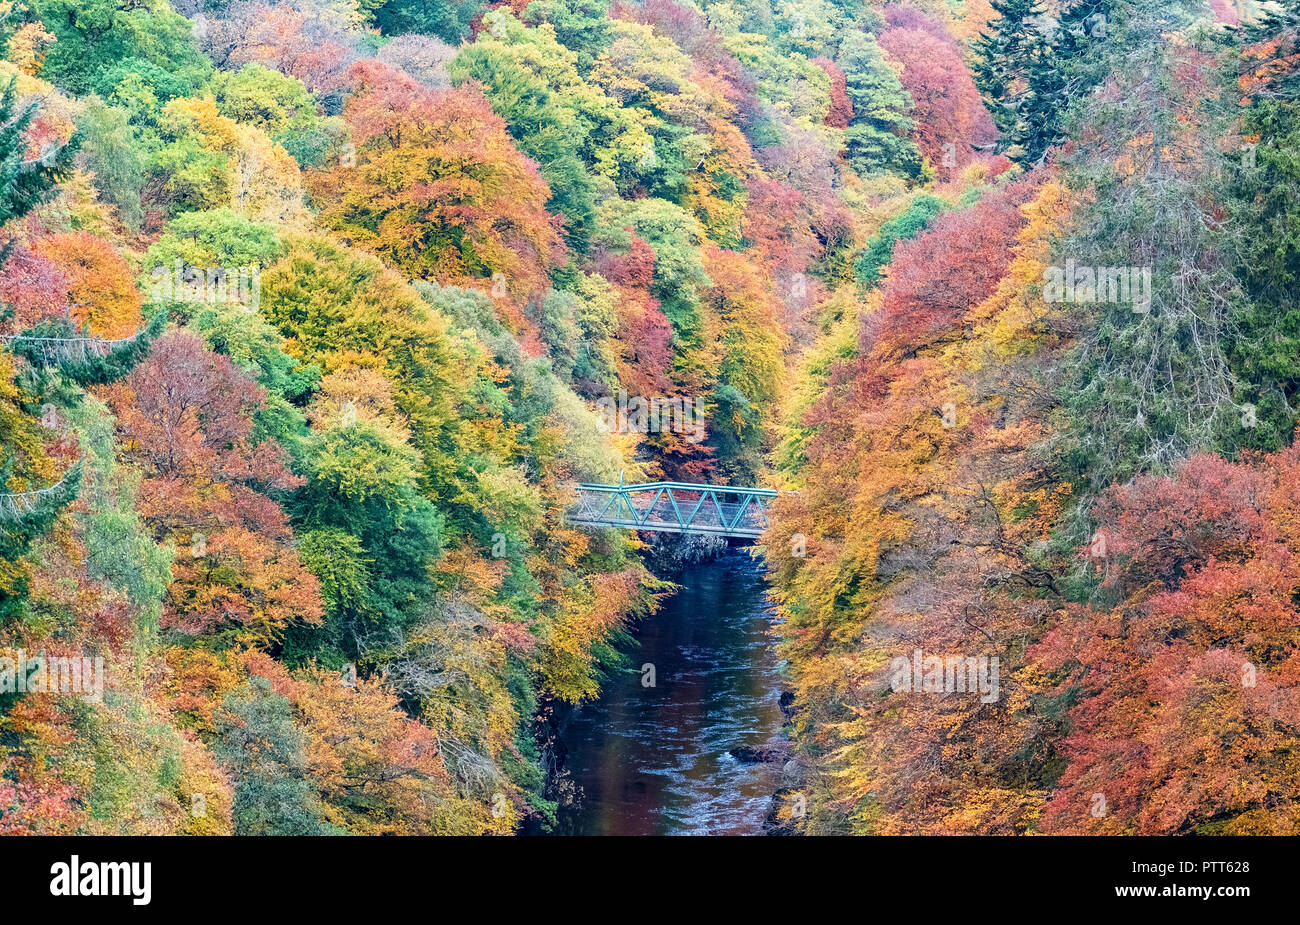 Pitlochry, Scotland, United Kingdom, 10th October 2018.  Spectacular autumn colours in the trees surround a small footbridge crossing the River Garry at Killiecrankie, the famous Perthshire beauty spot. Credit: Iain Masterton/Alamy Live News Stock Photo